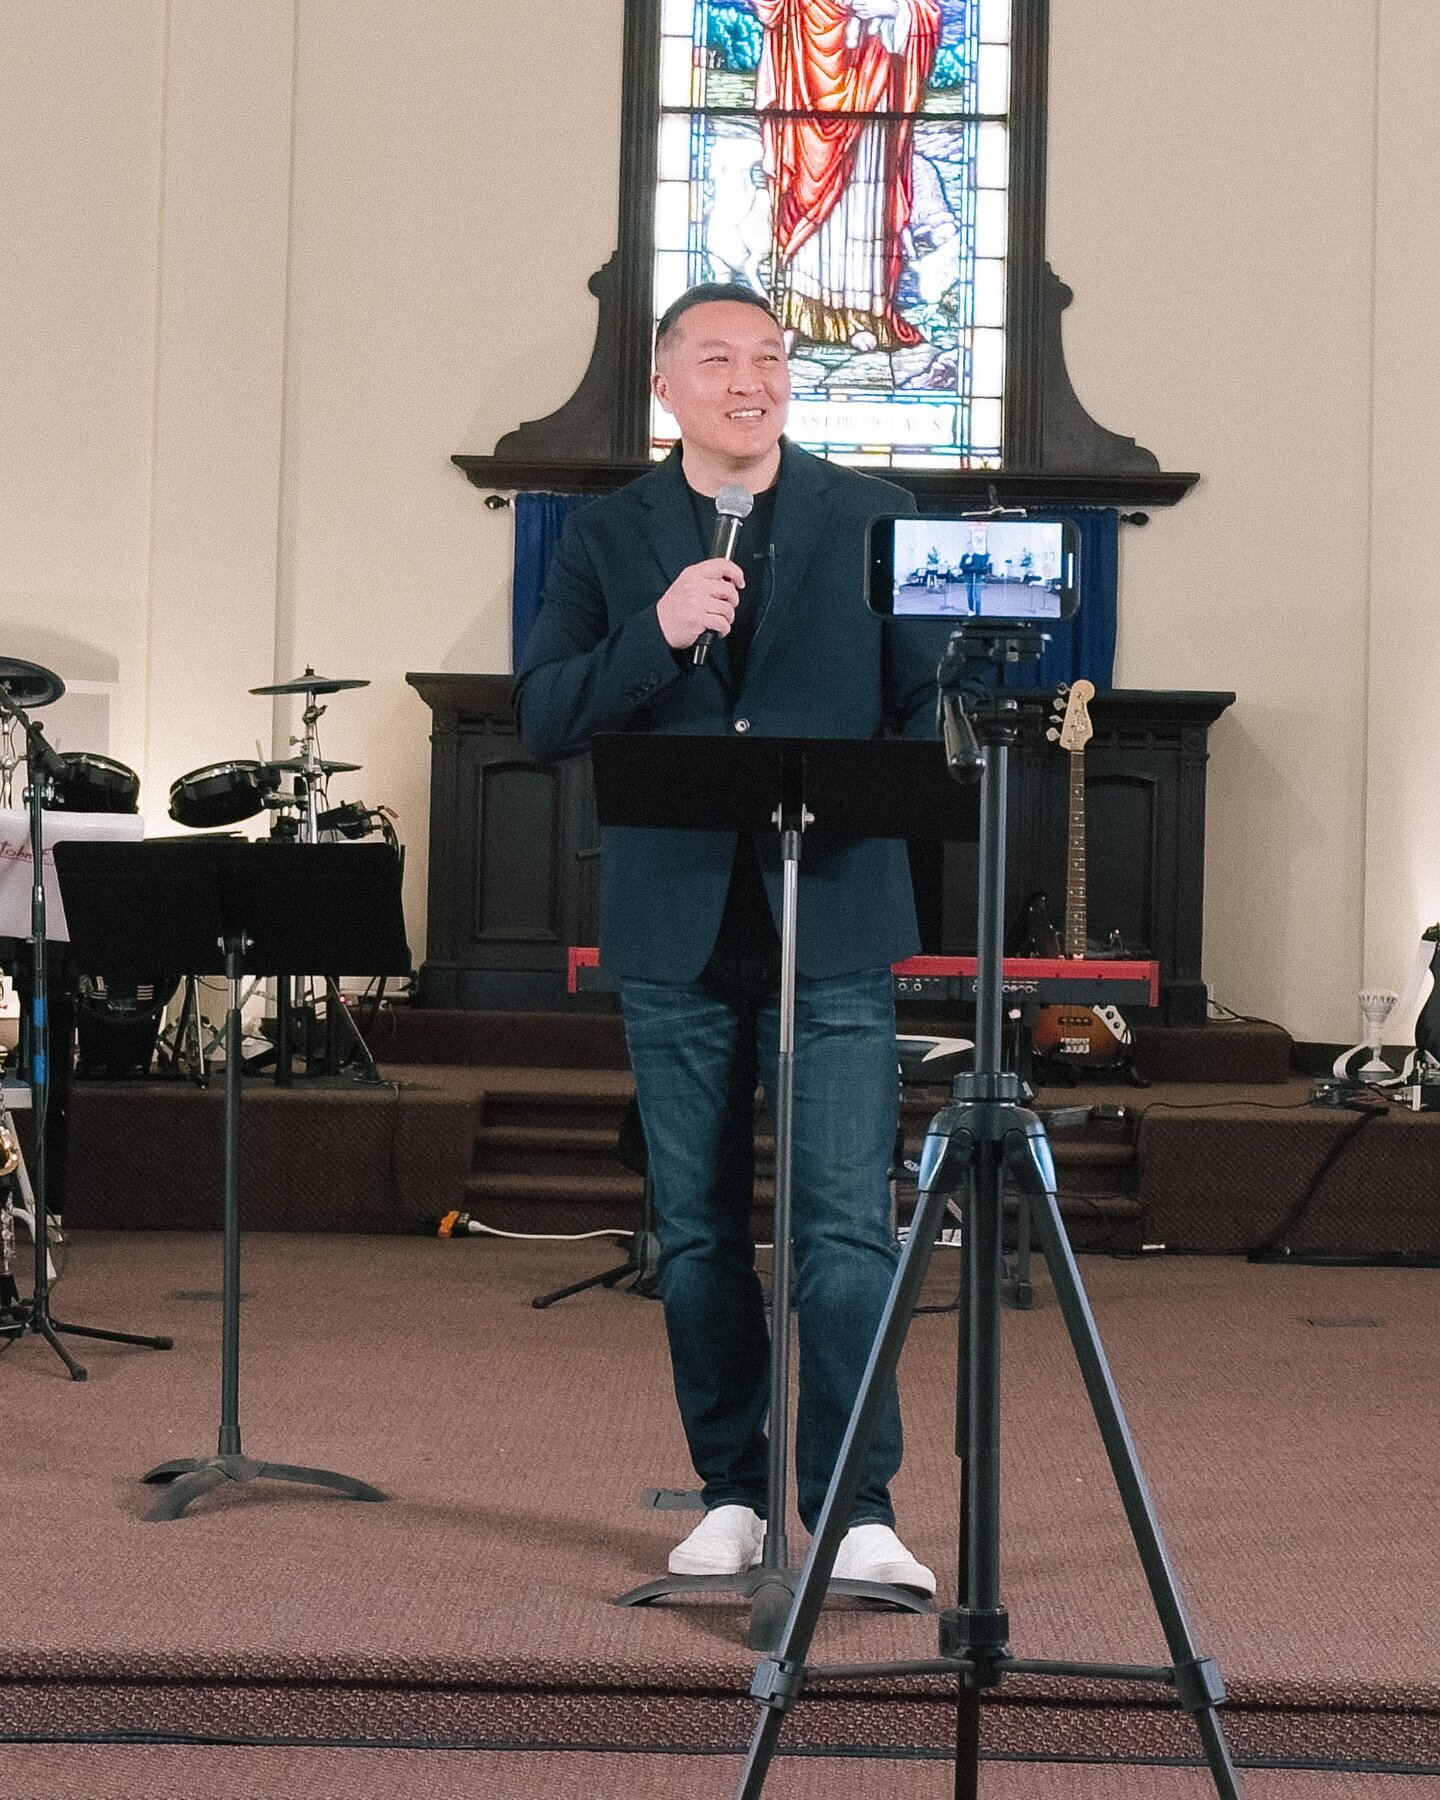 This past Sunday, we heard from Pastor Steve as he discussed the upcoming transition of him leaving our church and handing over the reins to Pastor Samuel. It&rsquo;s a significant change as Pastor Steve and Pastor Suzana will be embarking on a new c